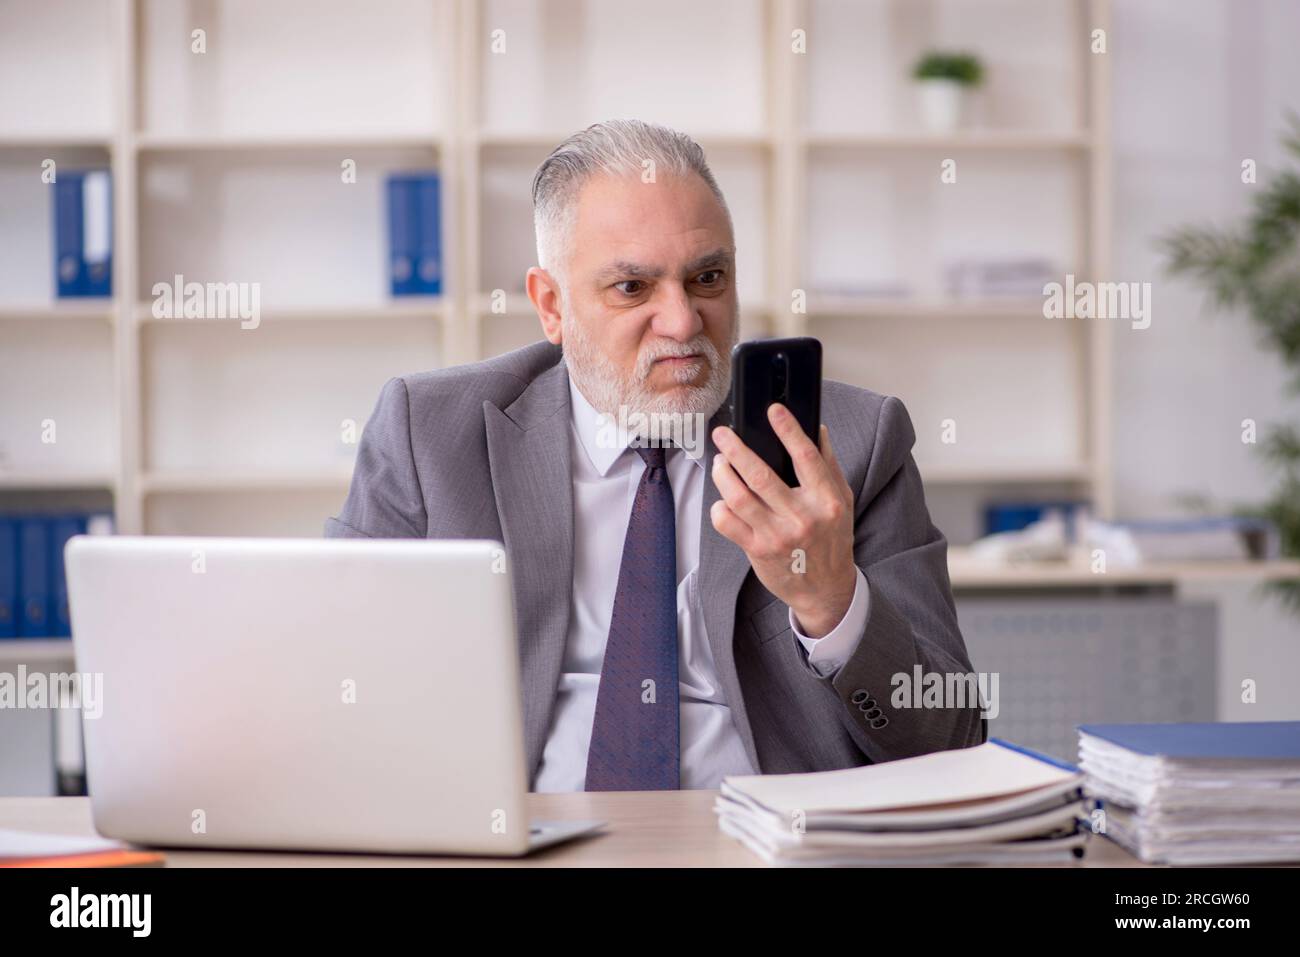 Old employee speaking by phone at workplace Stock Photo